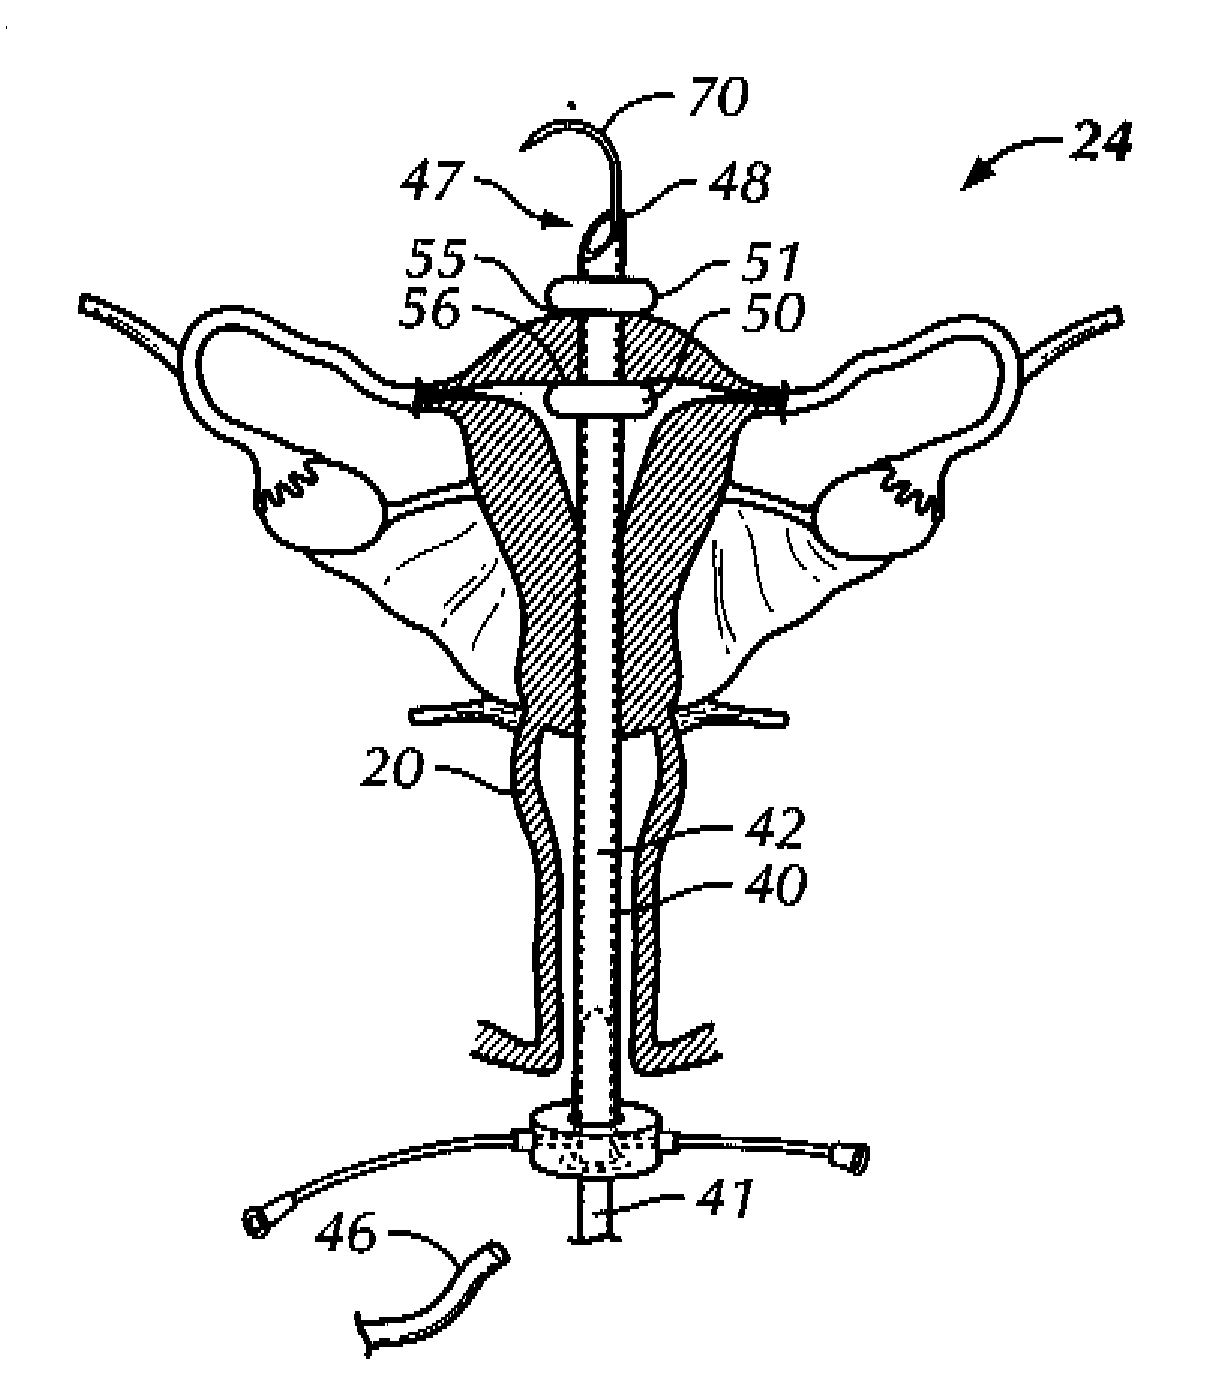 Methods and Apparatus for Natural Orifice Vaginal Hysterectomy